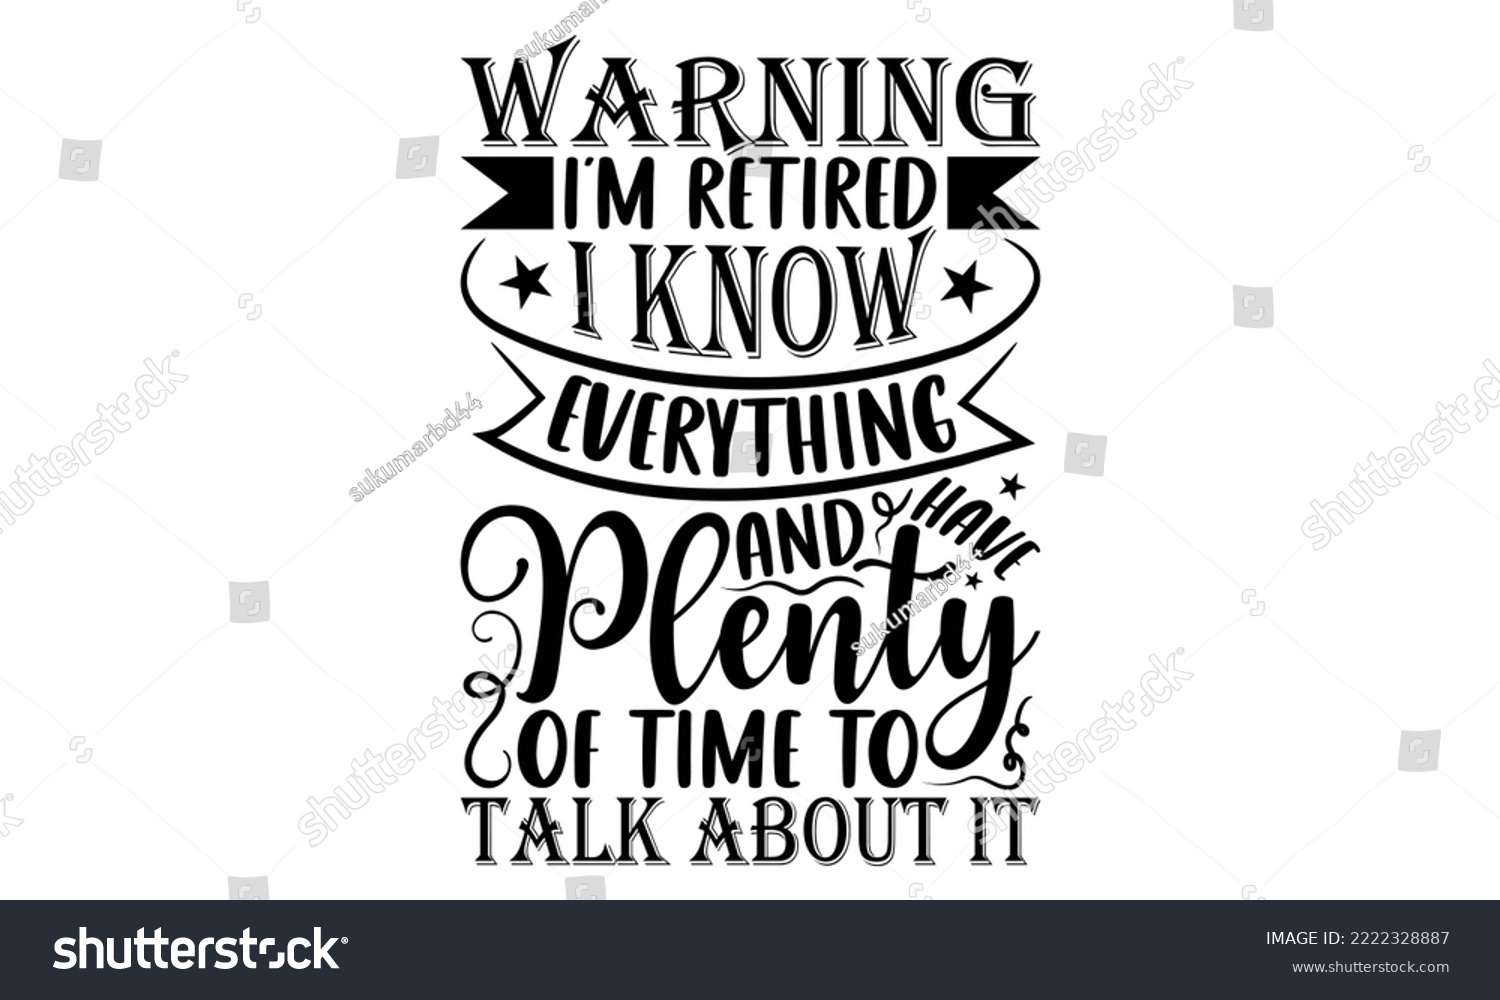 SVG of Warning I’m Retired I Know Everything And Have Plenty Of Time To Talk About It - Retirement SVG Design, Hand drawn lettering phrase isolated on white background, typography t shirt design, eps, Files  svg